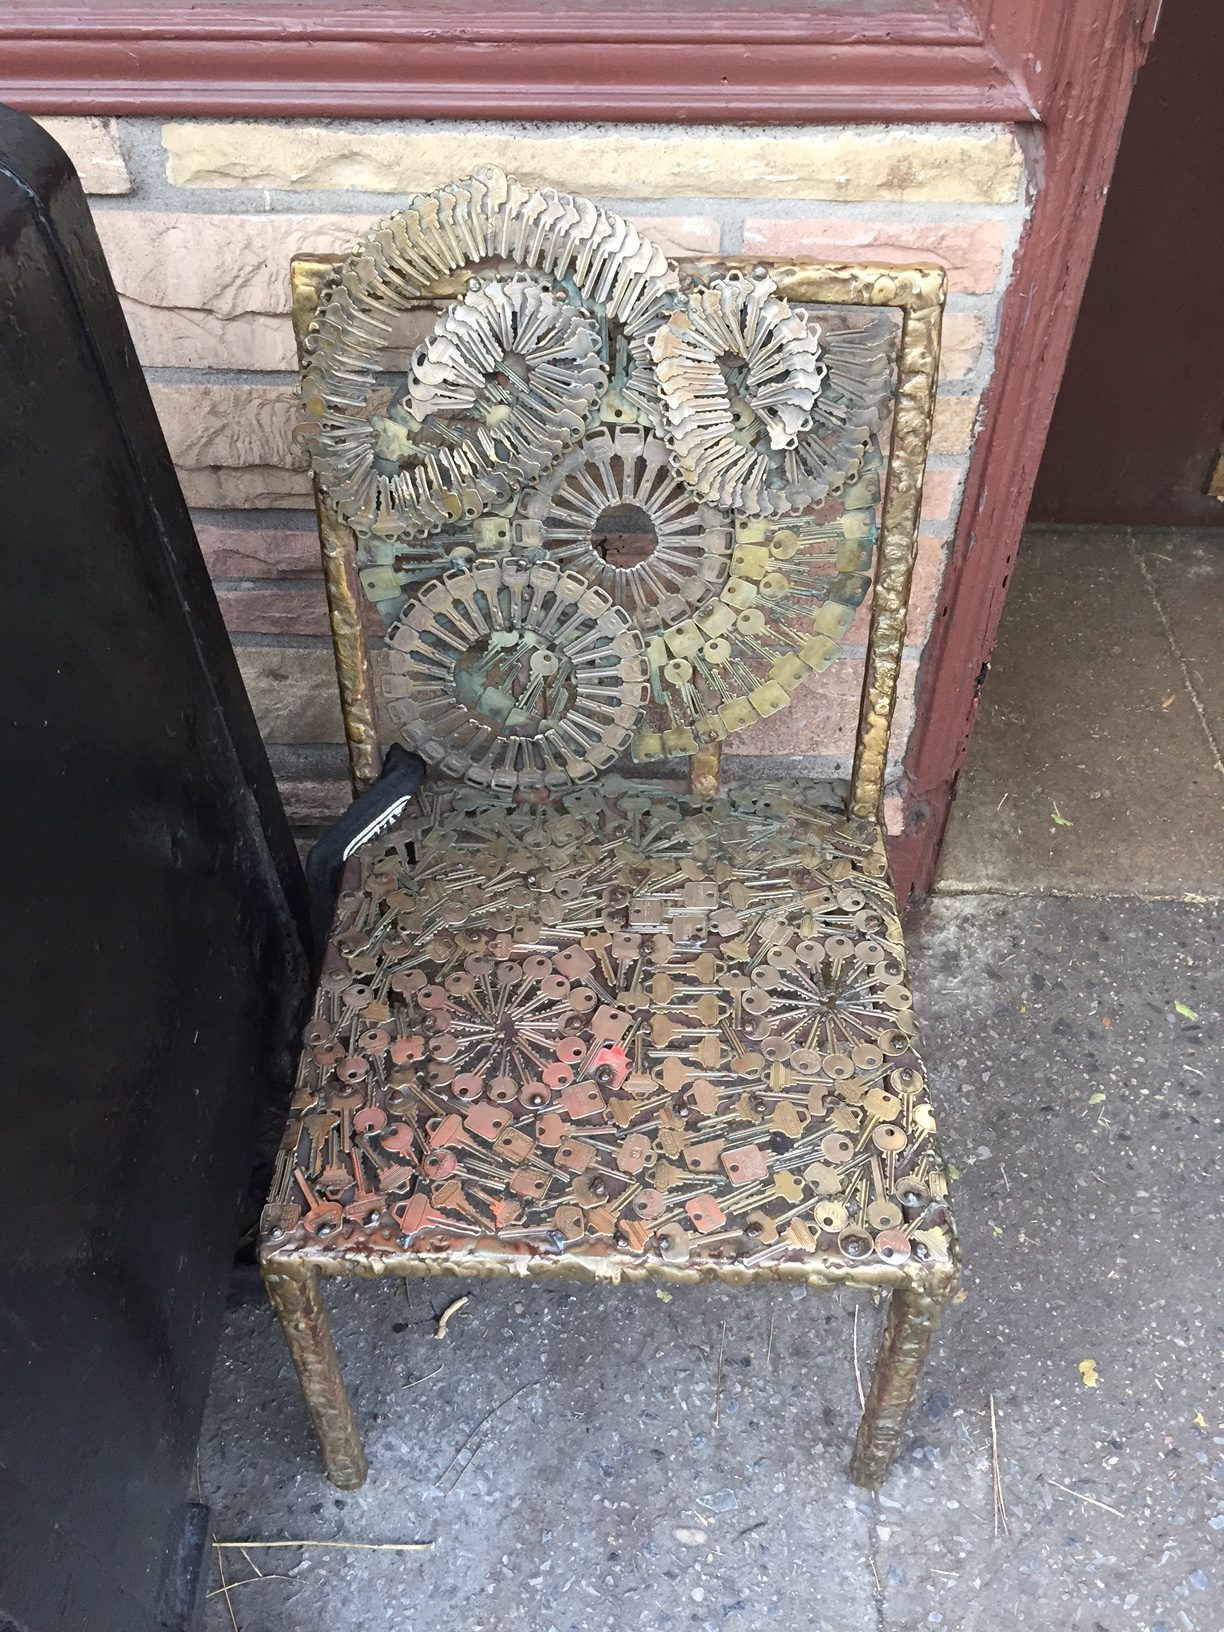 image of key mosaic chair at Greenwich Locksmiths in New York